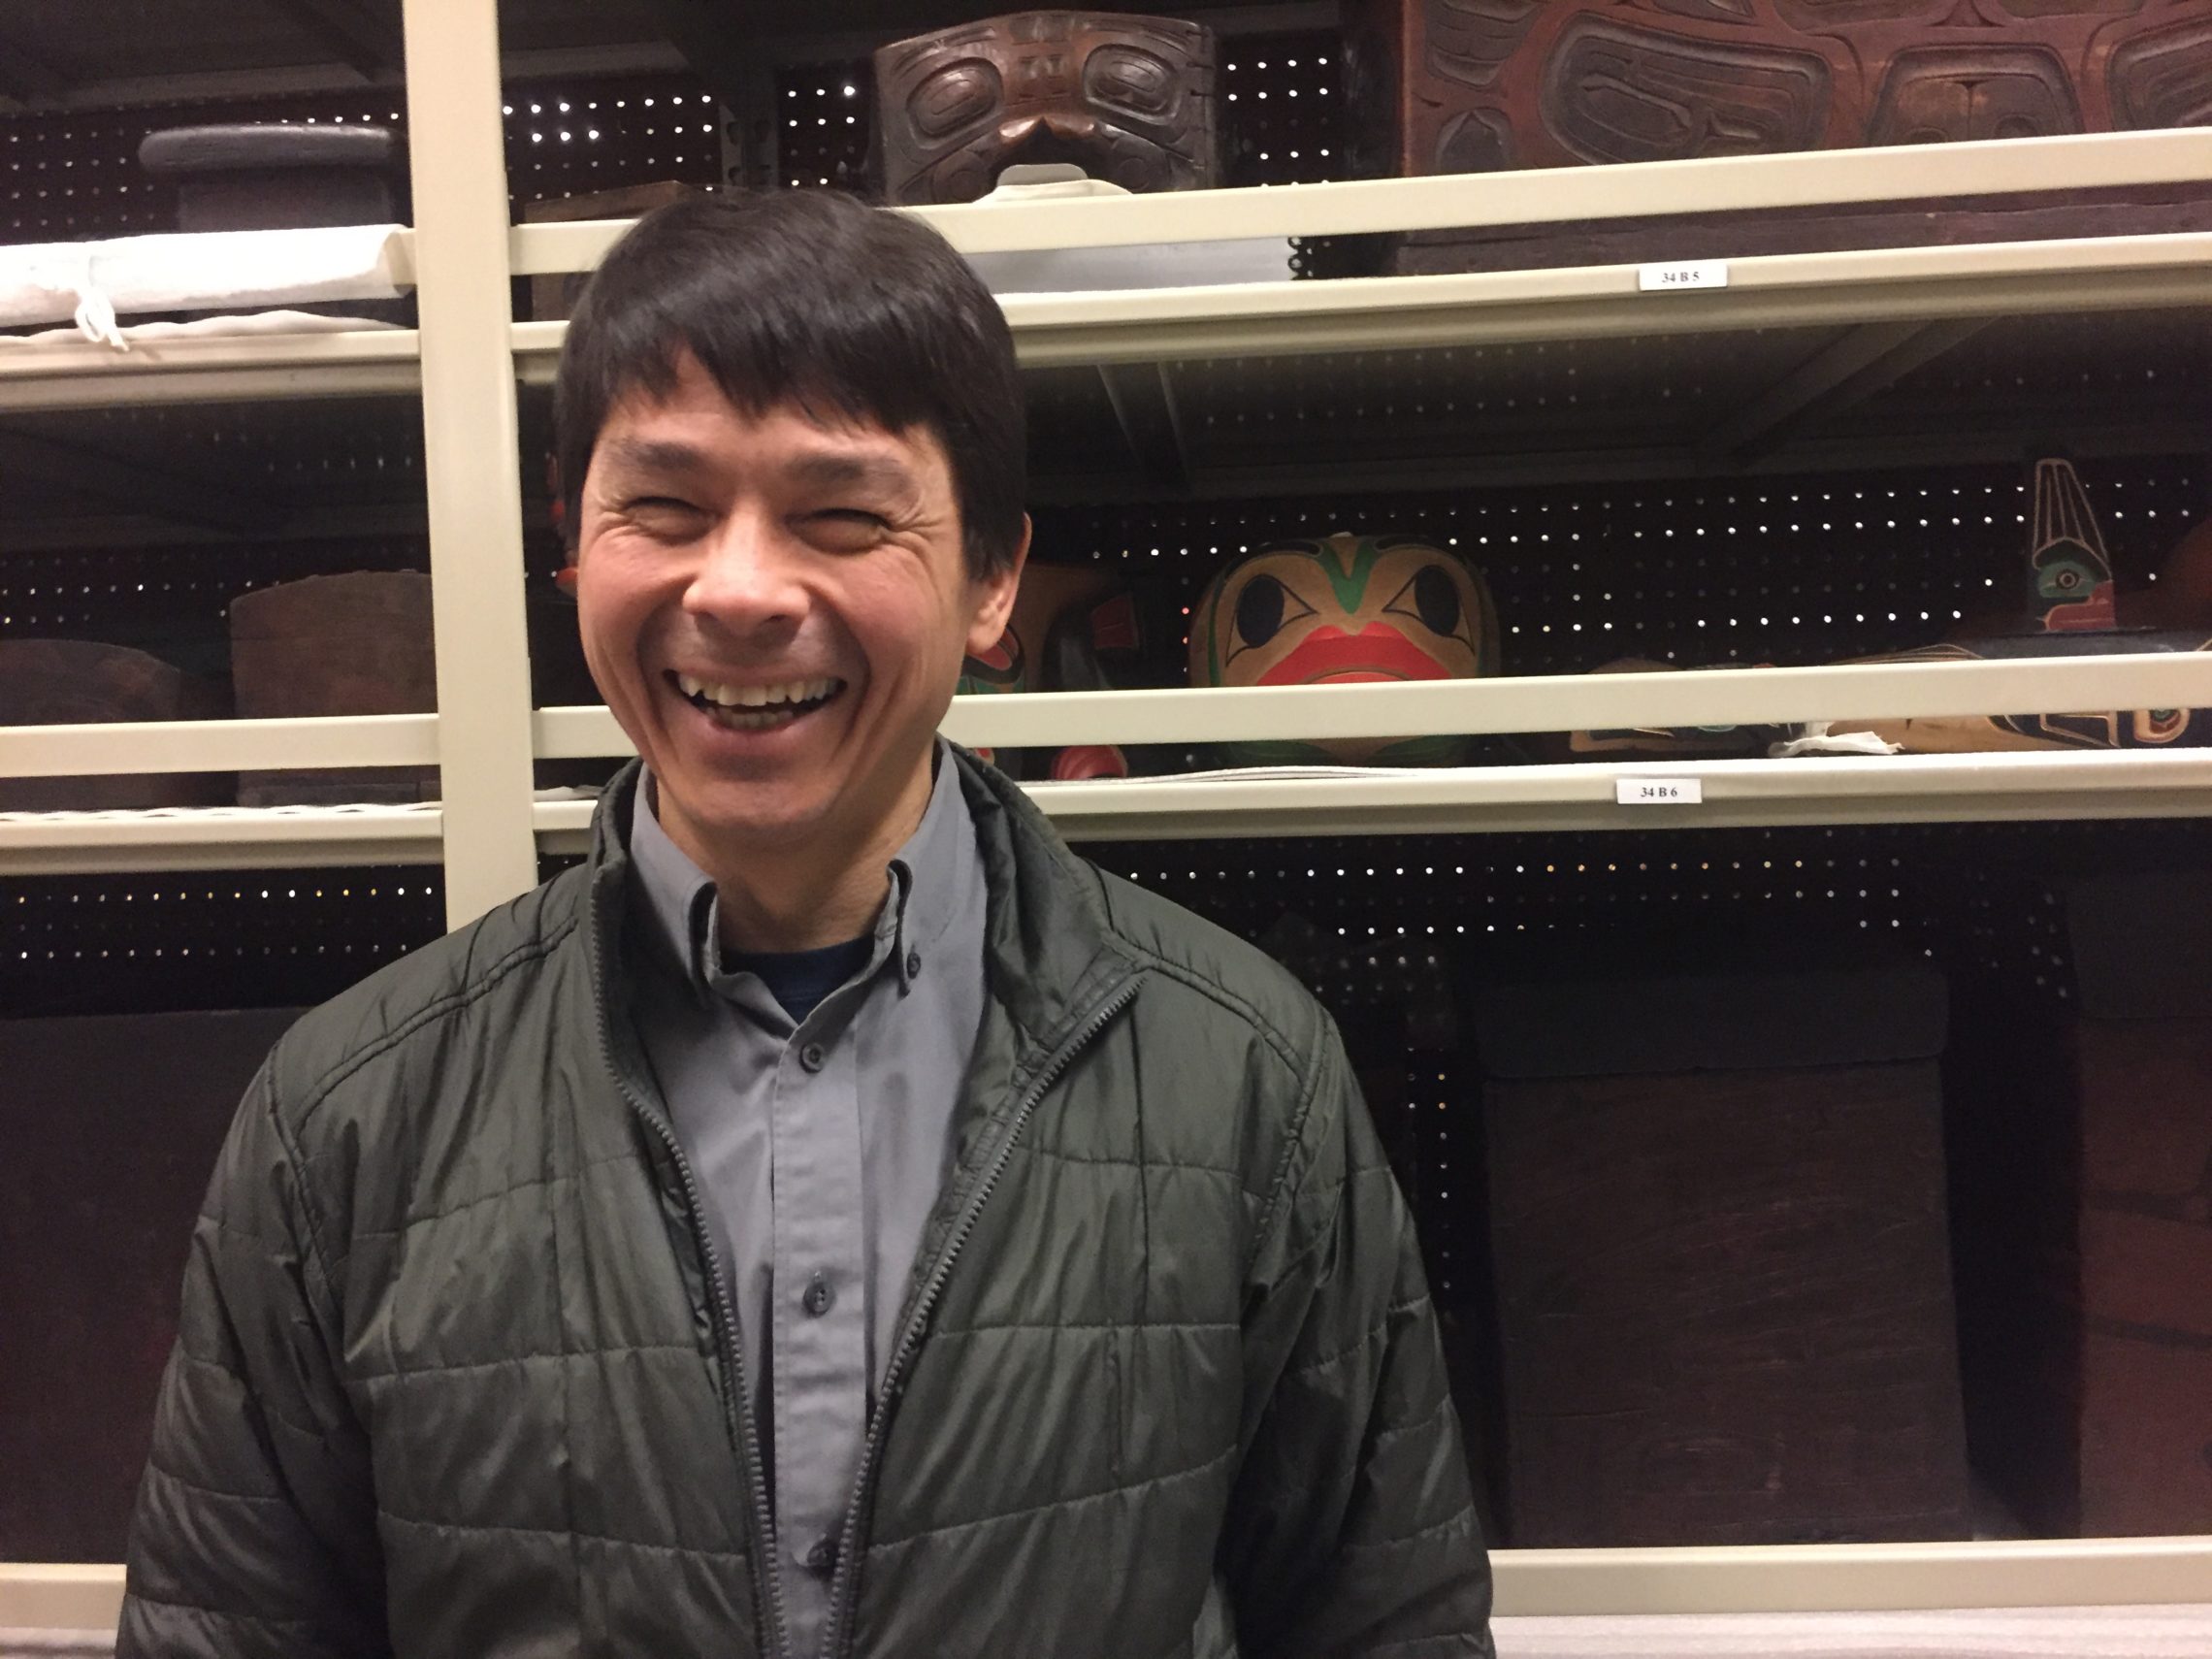 Sven Haakanson, the curator of North American Anthropology at the Burke Museum, says he wants exhibits at the new museum to speak to the resiliency of North America's Native people.